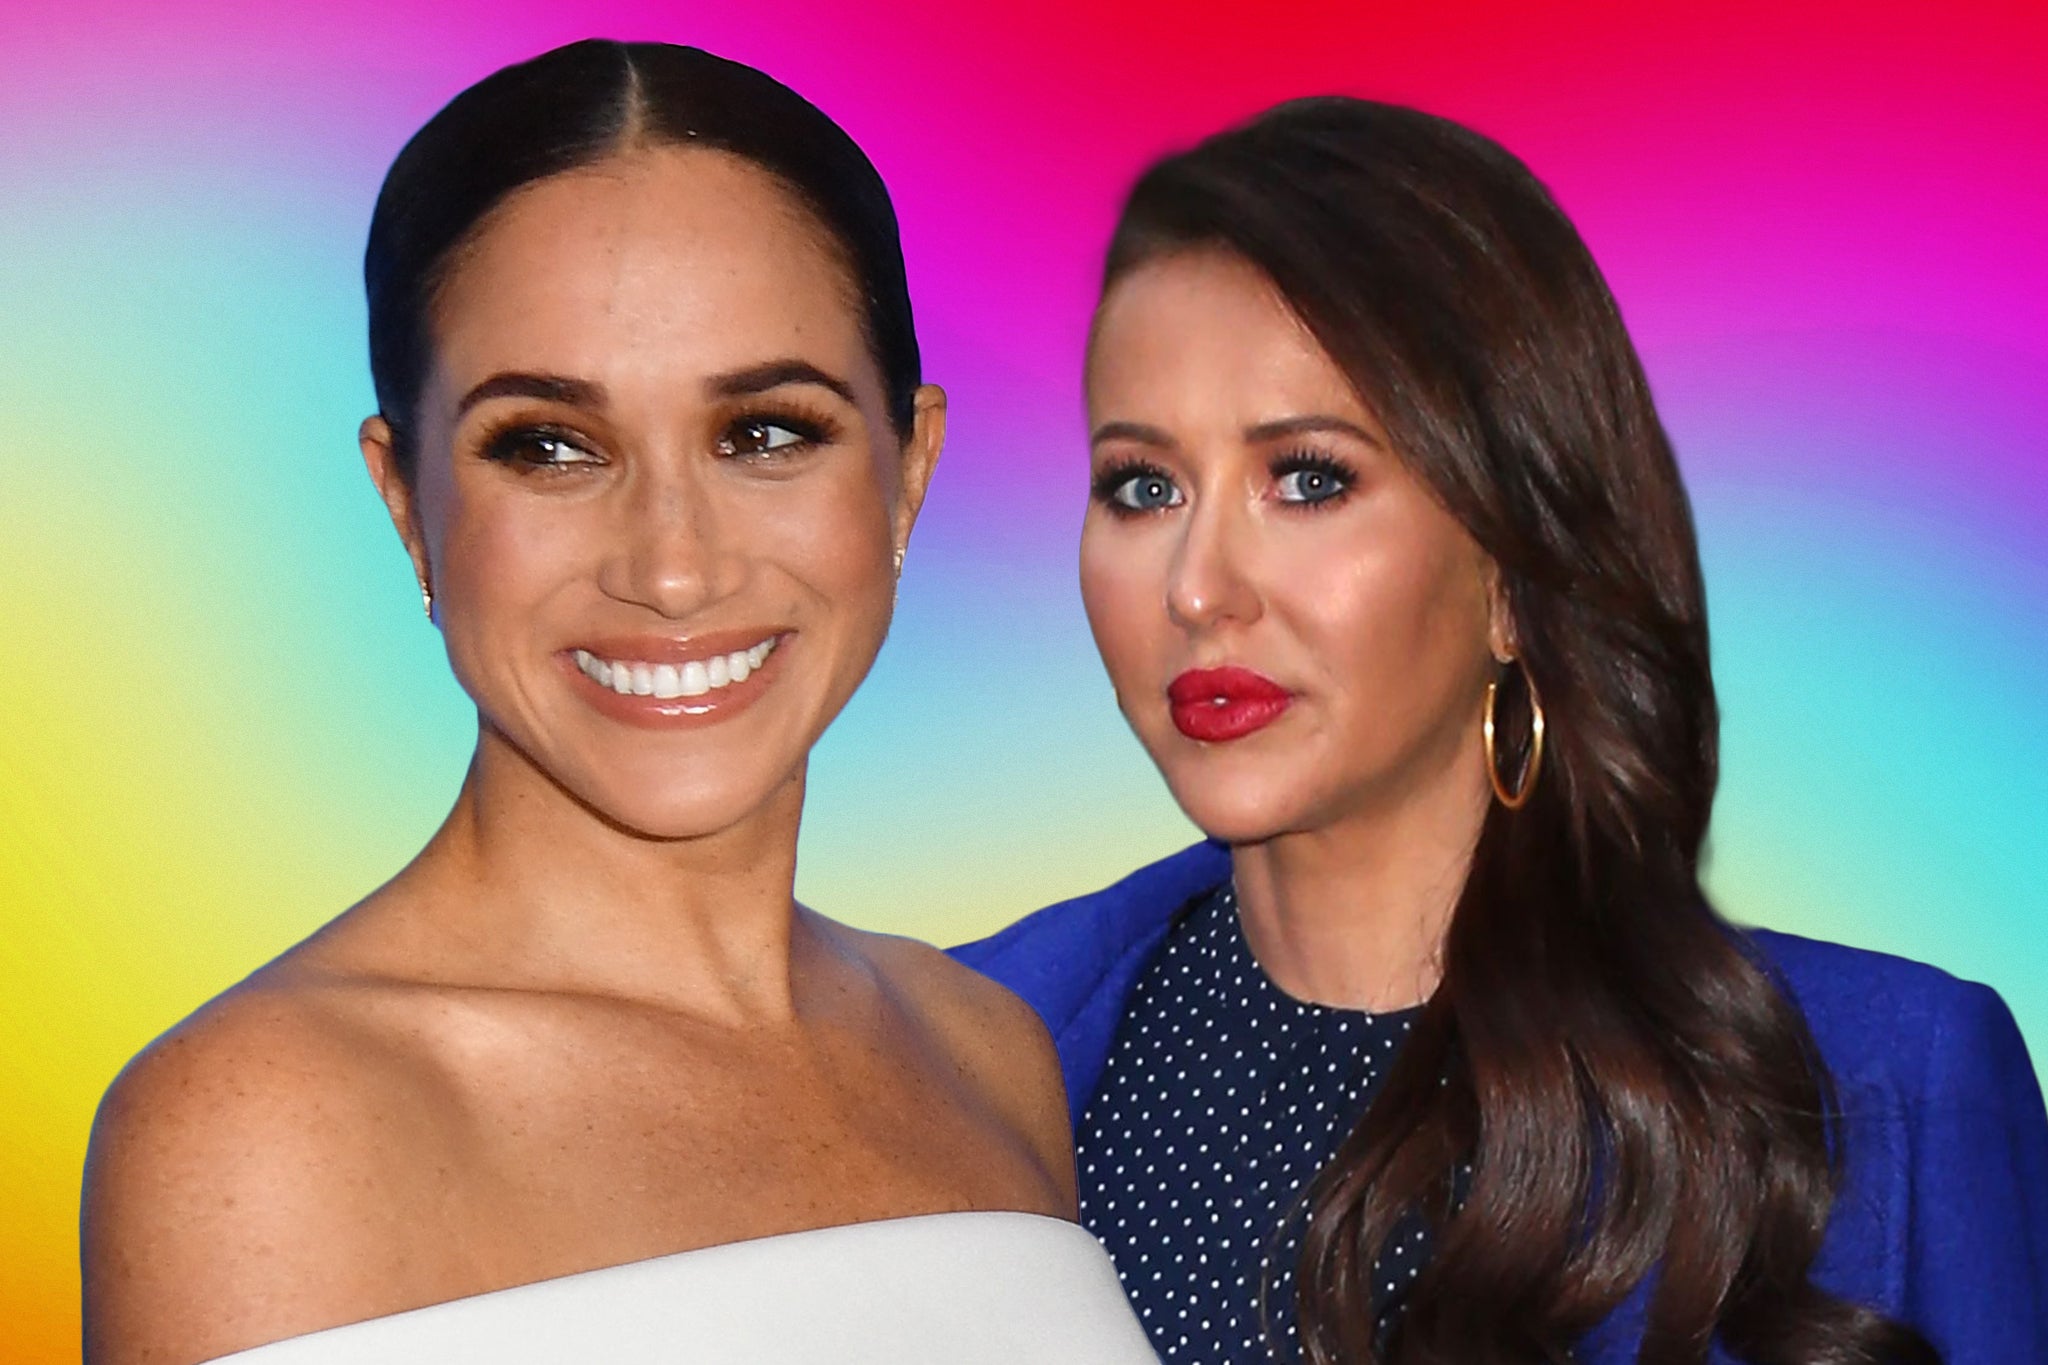 ‘There’s this absurd notion that friendships have to last forever’: Meghan Markle and Jessica Mulroney